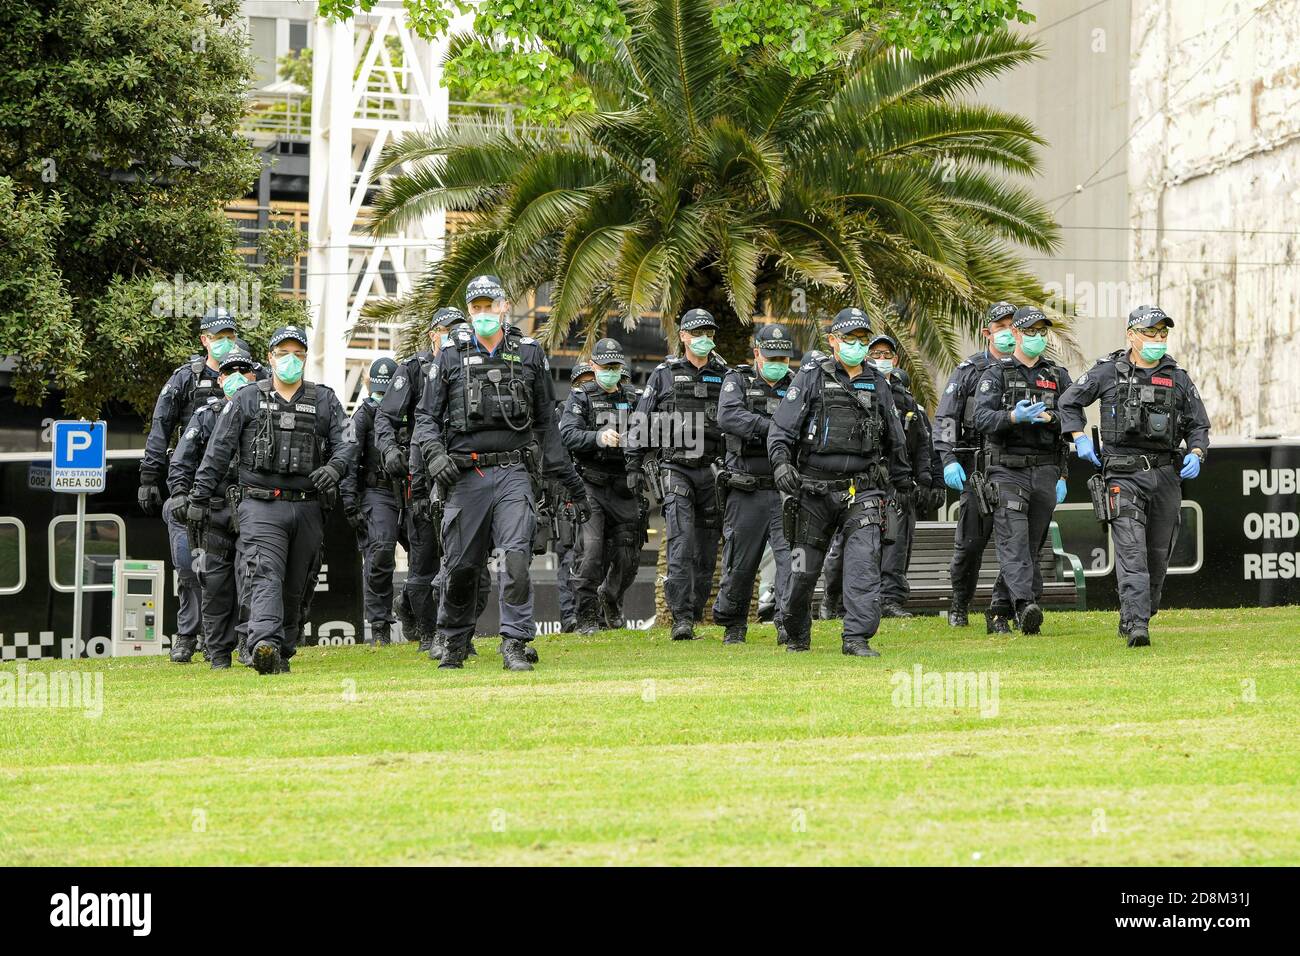 Melbourne, Australia 31 Oct 2020, Public Order Response Police march in formation into Treasury Gardens in force to disrupt a anti-government protest planed for Saturday morning. Credit: Michael Currie/Alamy Live News Stock Photo